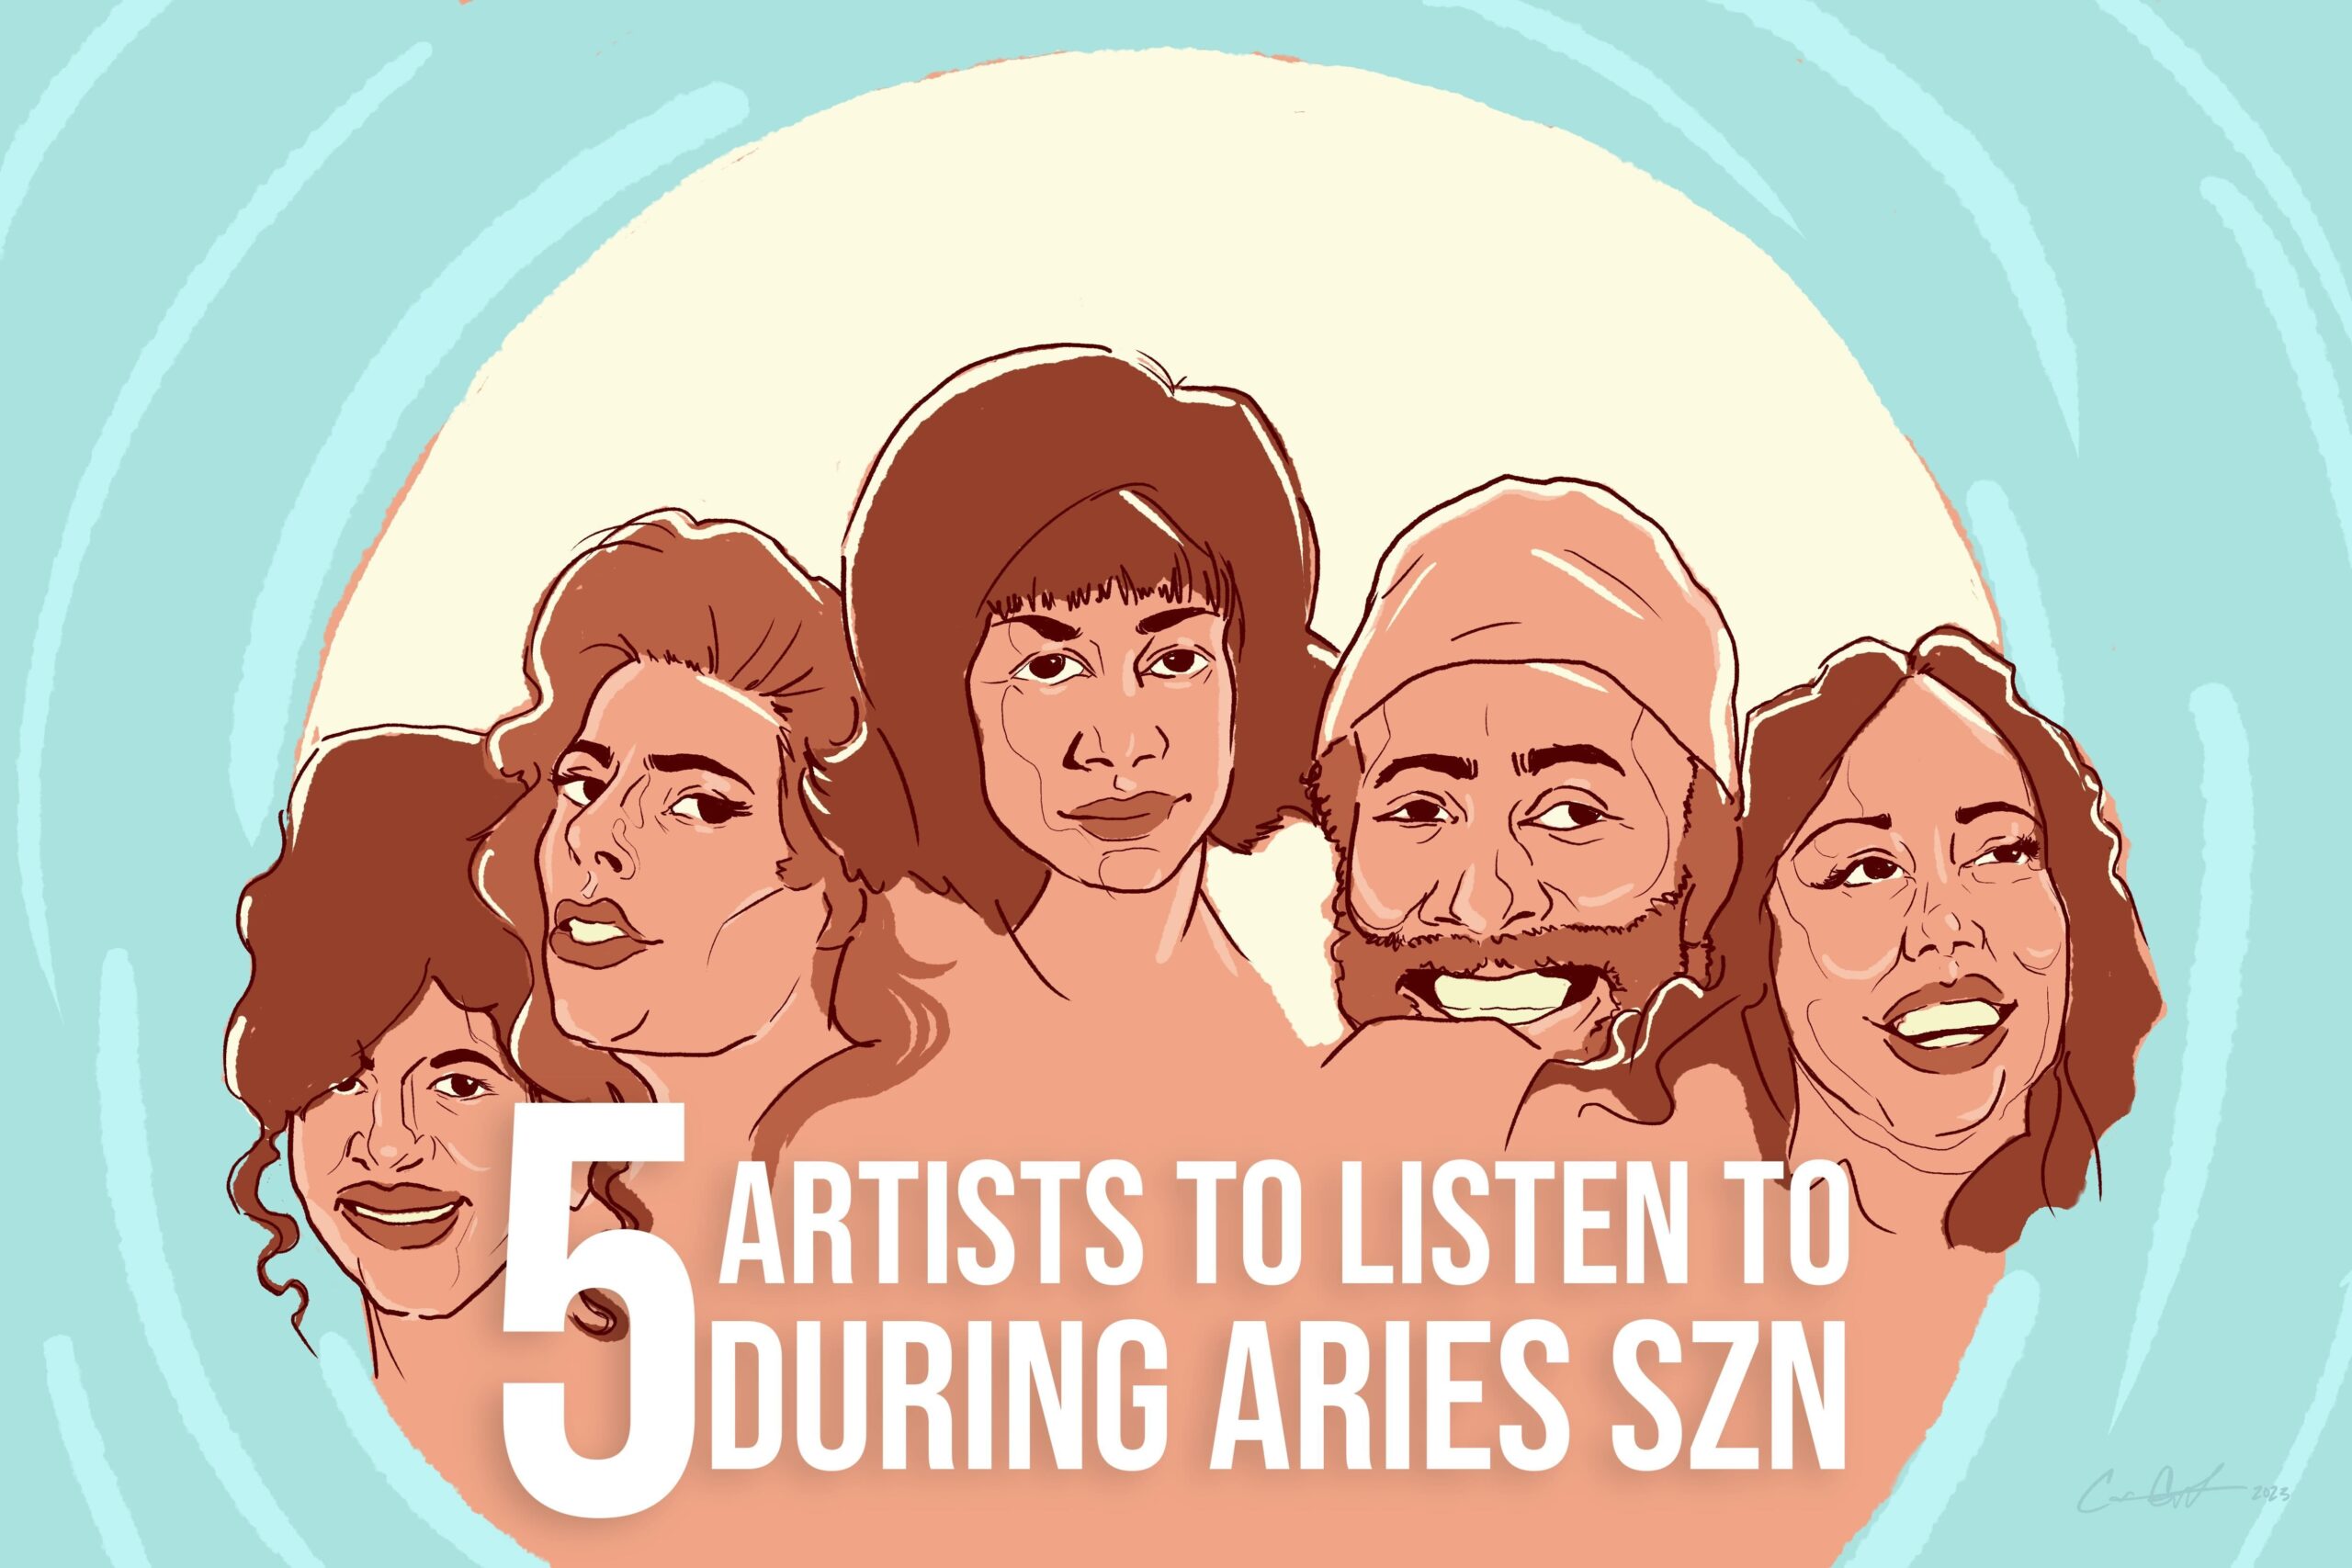 Five Artist to Listen to During Aries SZN